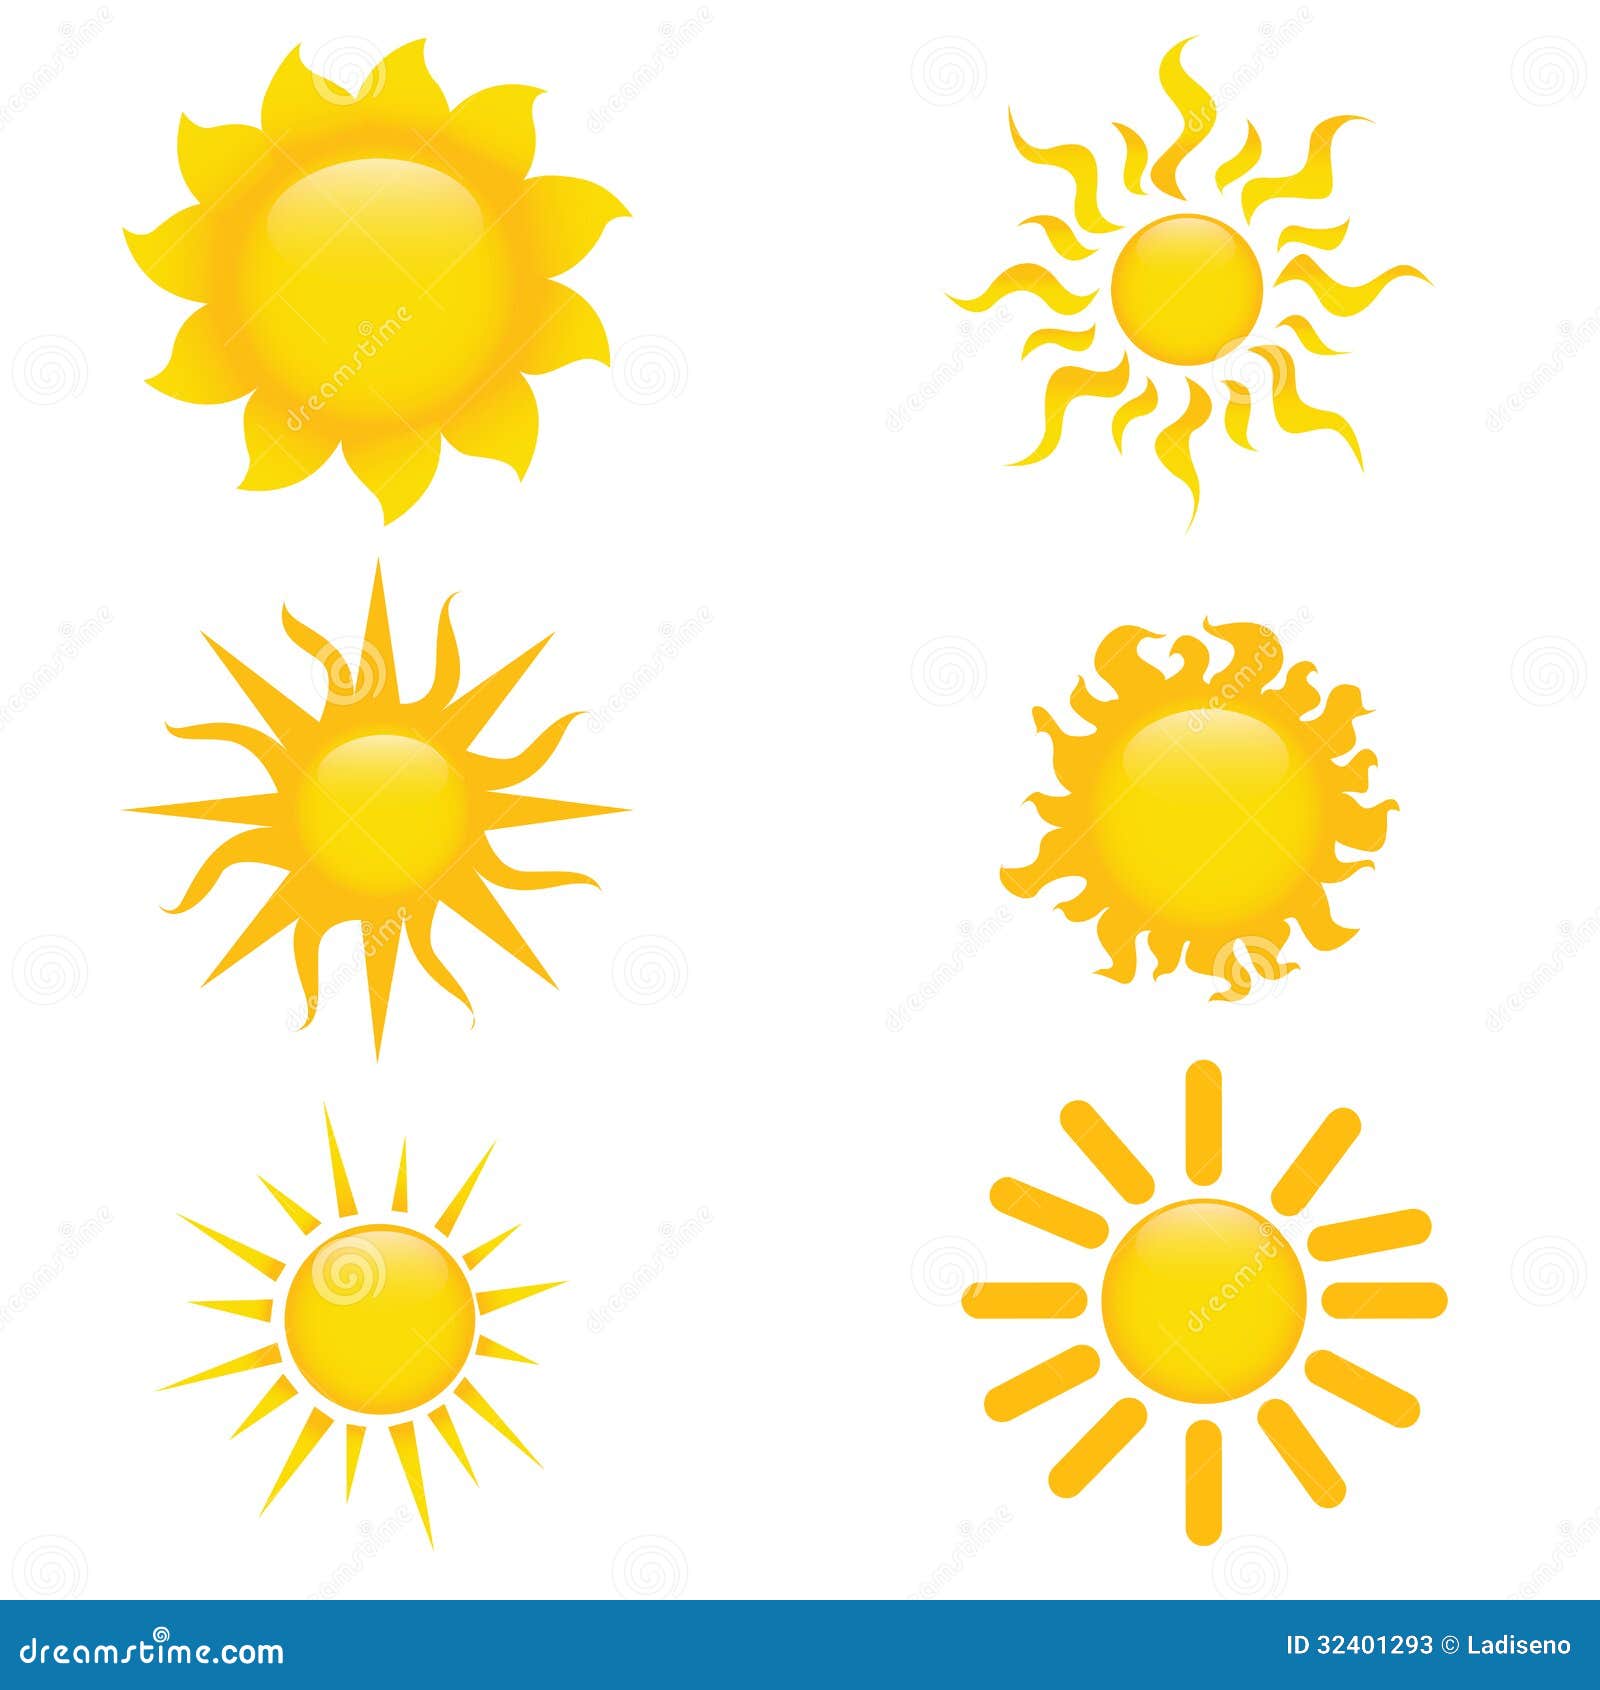 Sun icons stock vector. Illustration of spring, fire - 32401293